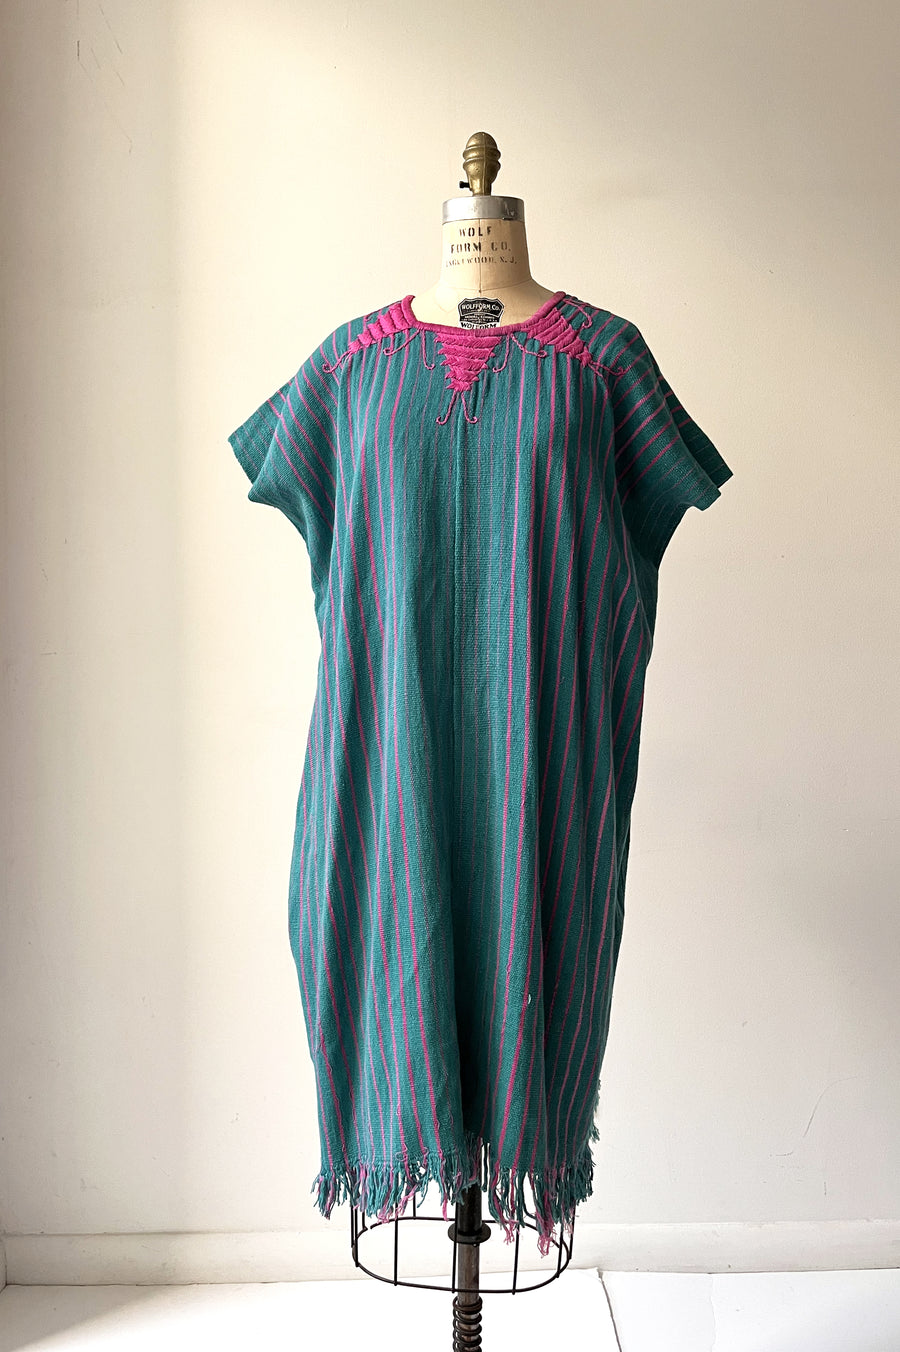 Vintage Teal and Pink Embroidered Dress